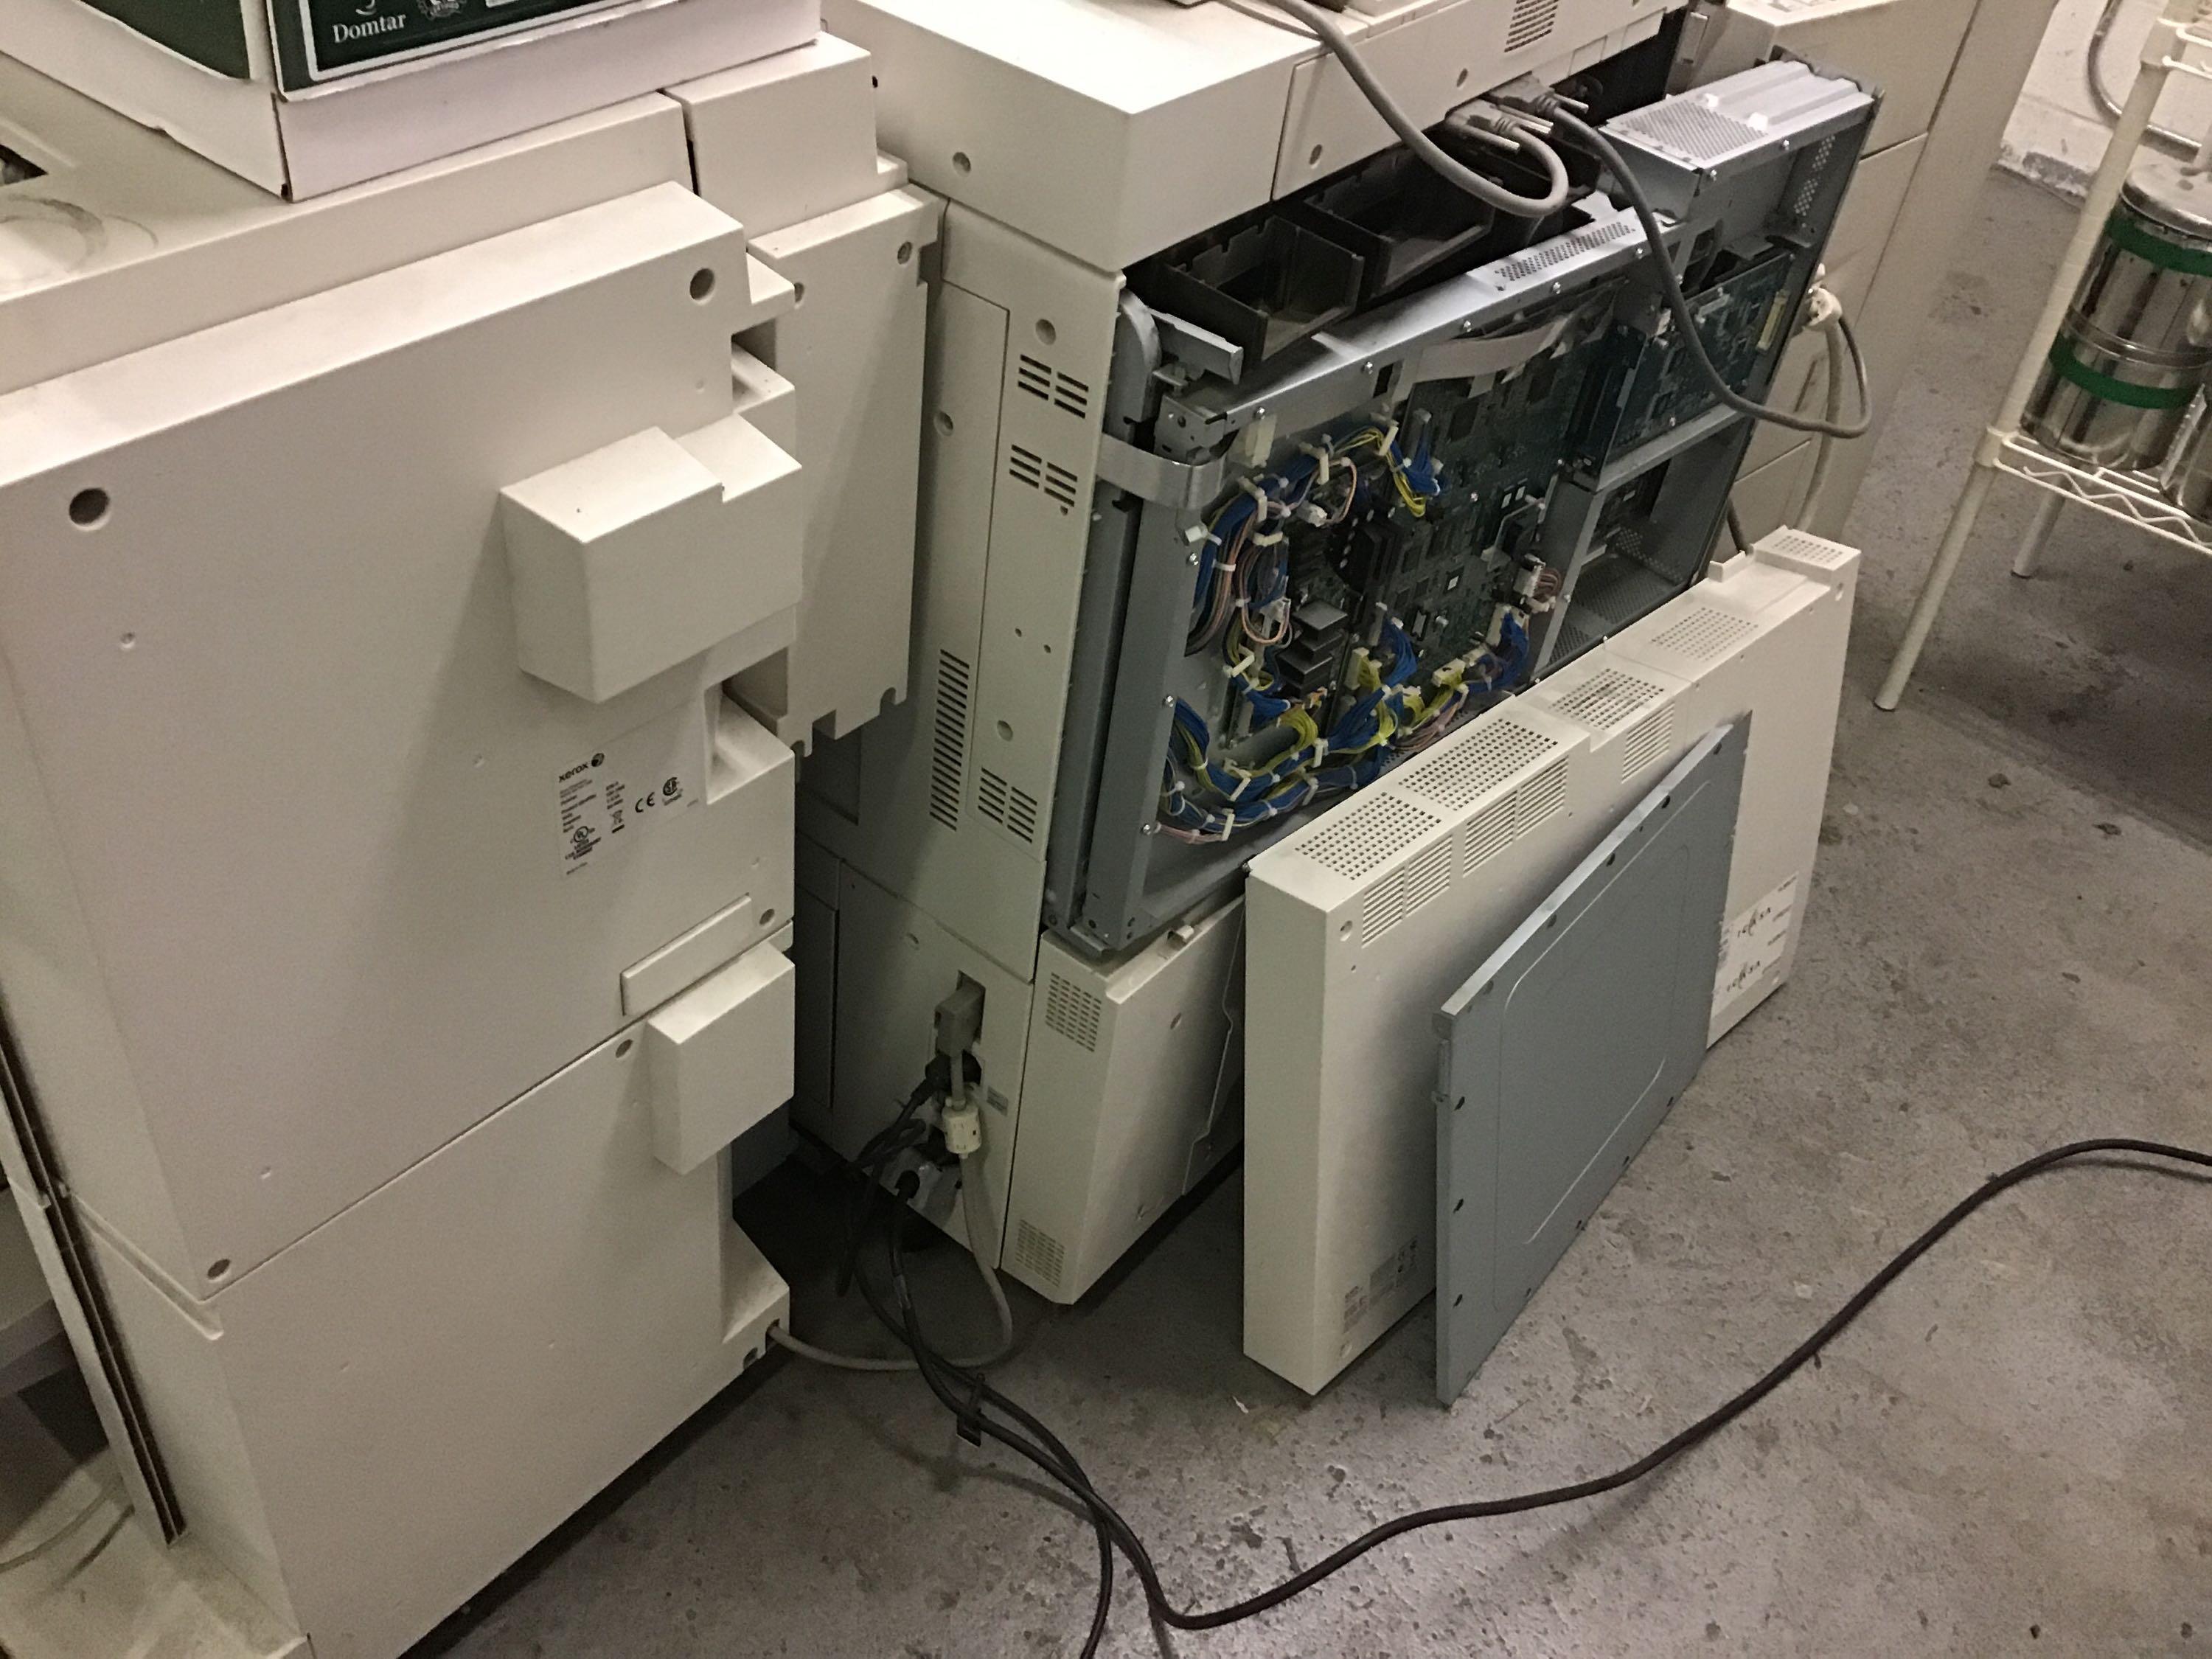 Xerox SFN-4 Finisher. This unit would not power on and appears to be a parts machine